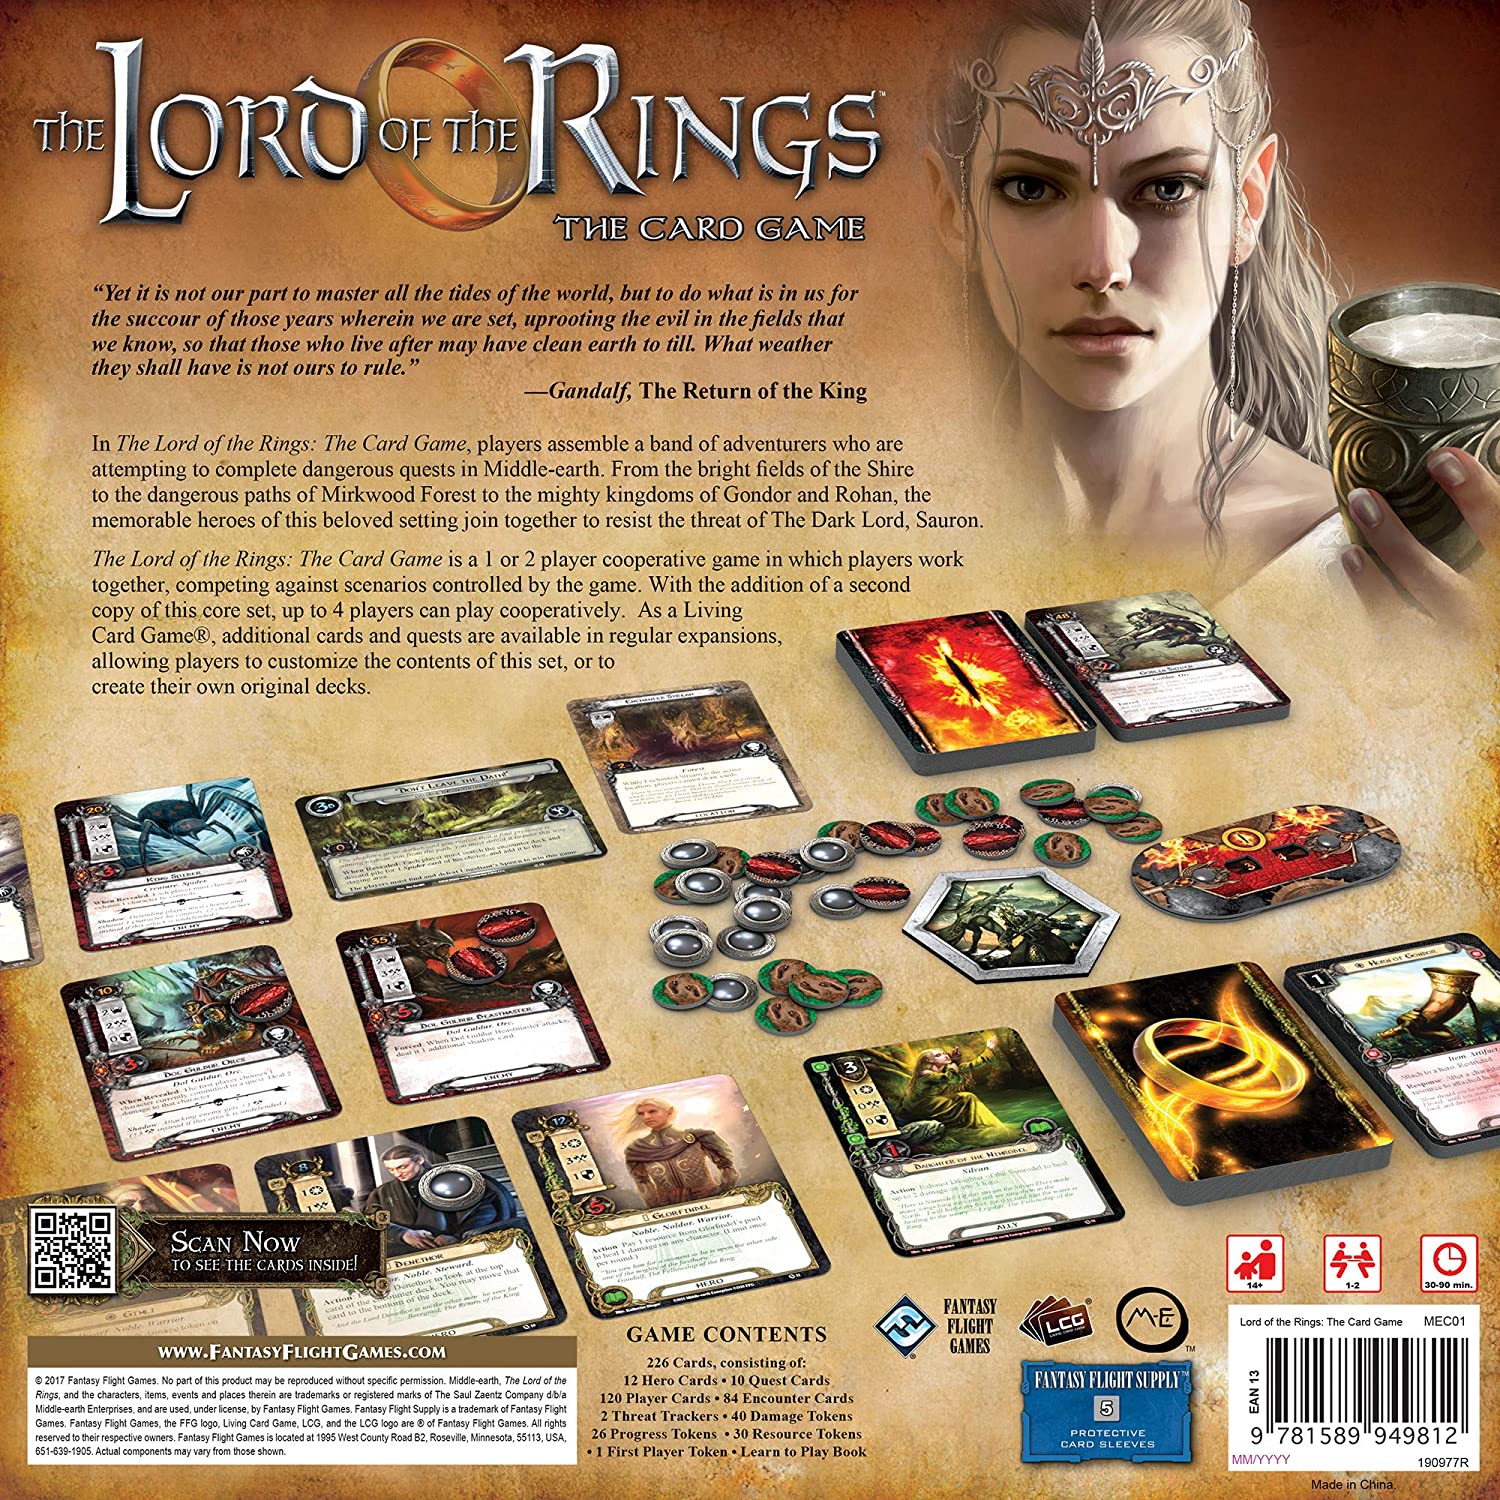 Lord of the Rings LCG: The Fellowship of the Ring Saga Expansion